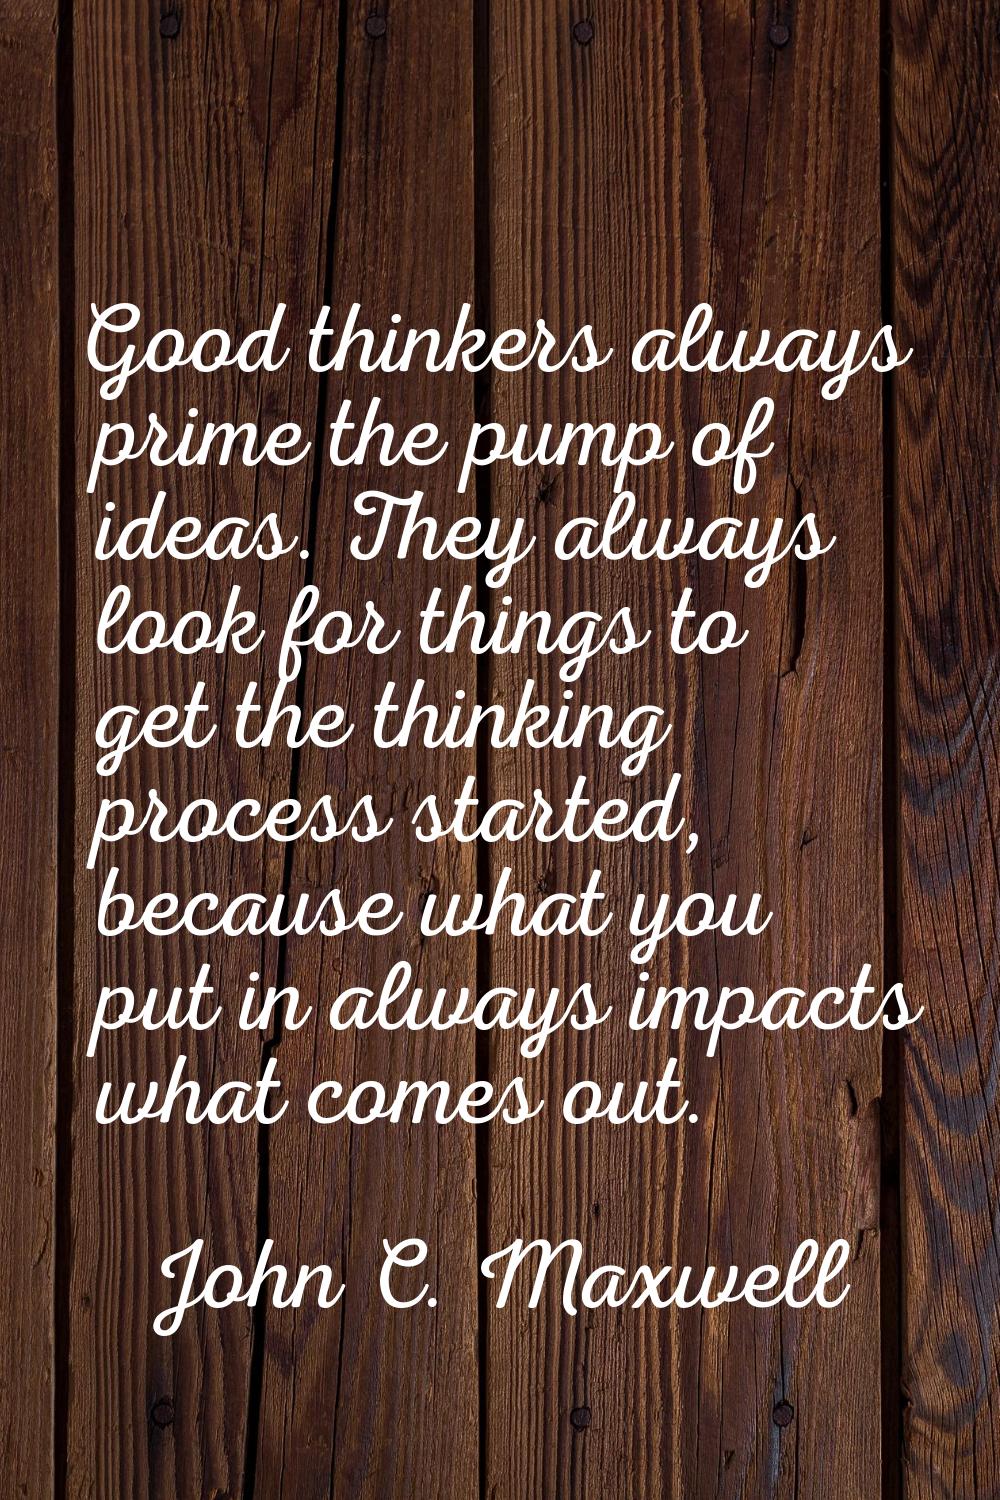 Good thinkers always prime the pump of ideas. They always look for things to get the thinking proce